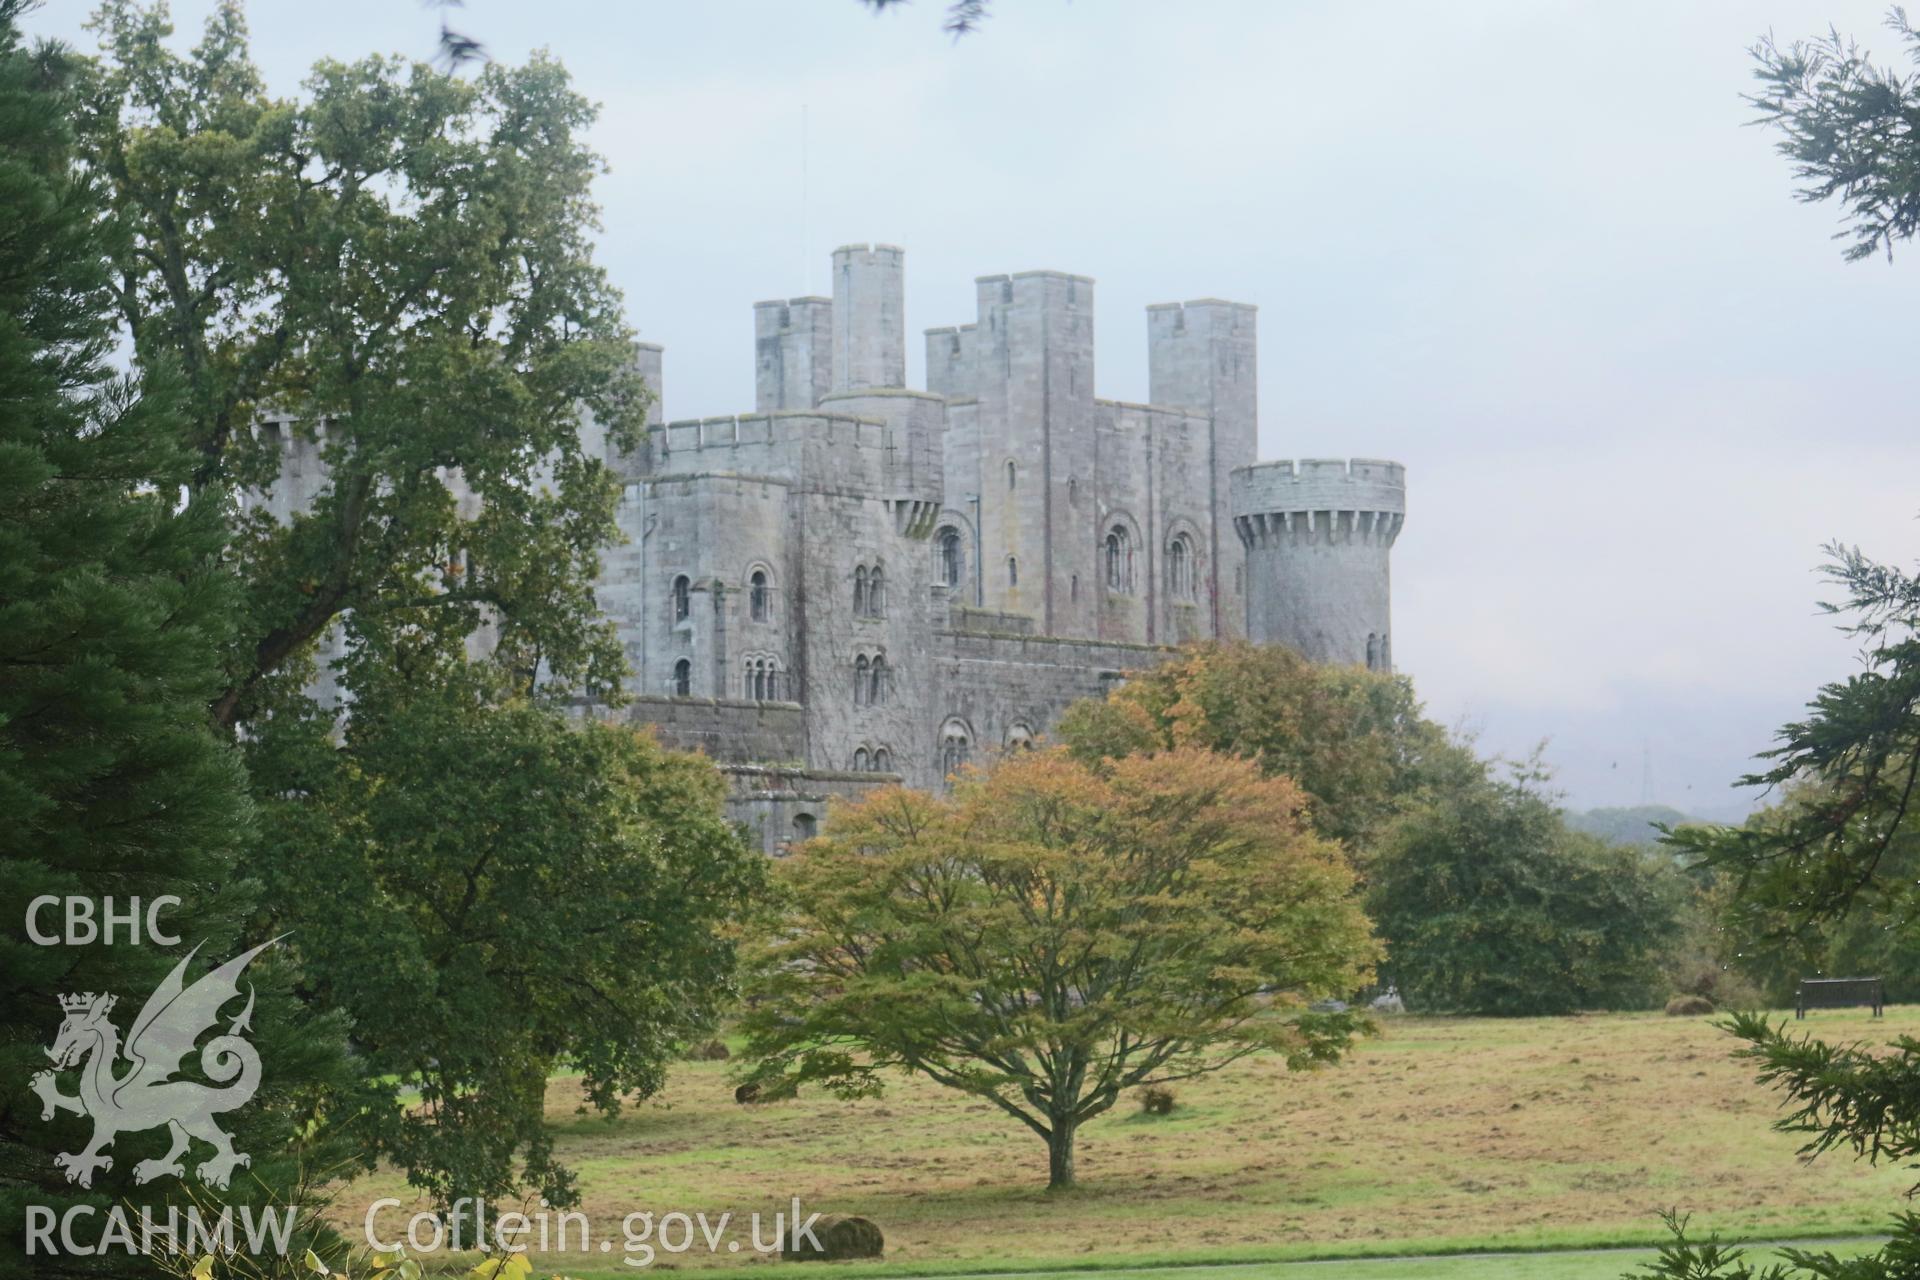 Photographic survey of Penrhyn Castle, Bangor. View of west front.